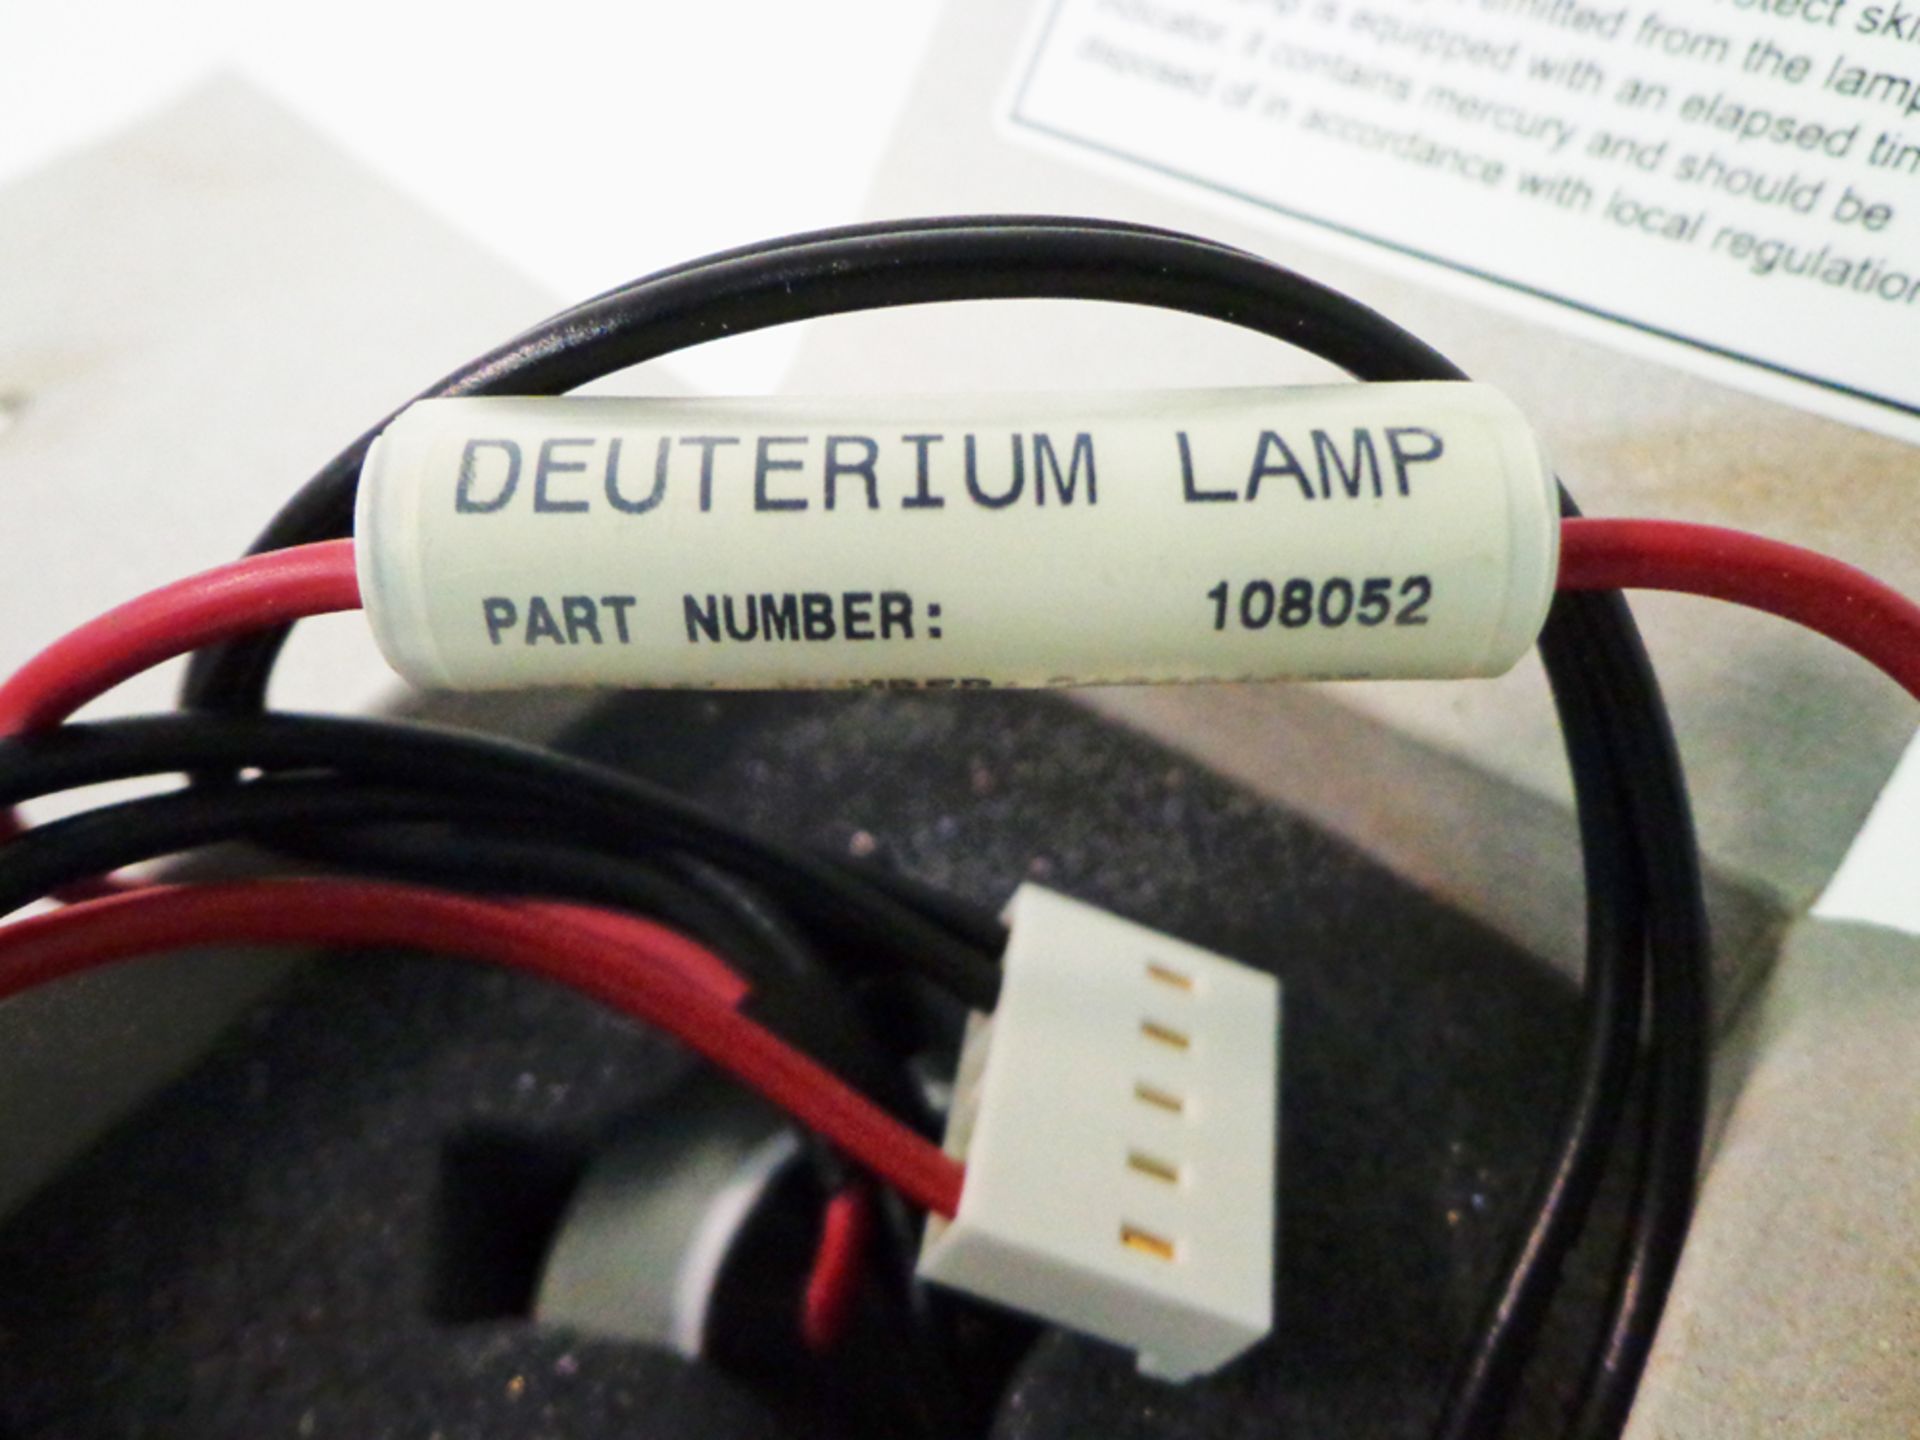 Thermo Scientific Deuterium Lamp Assembly, 108052, S/N 032213222 - Image 2 of 3